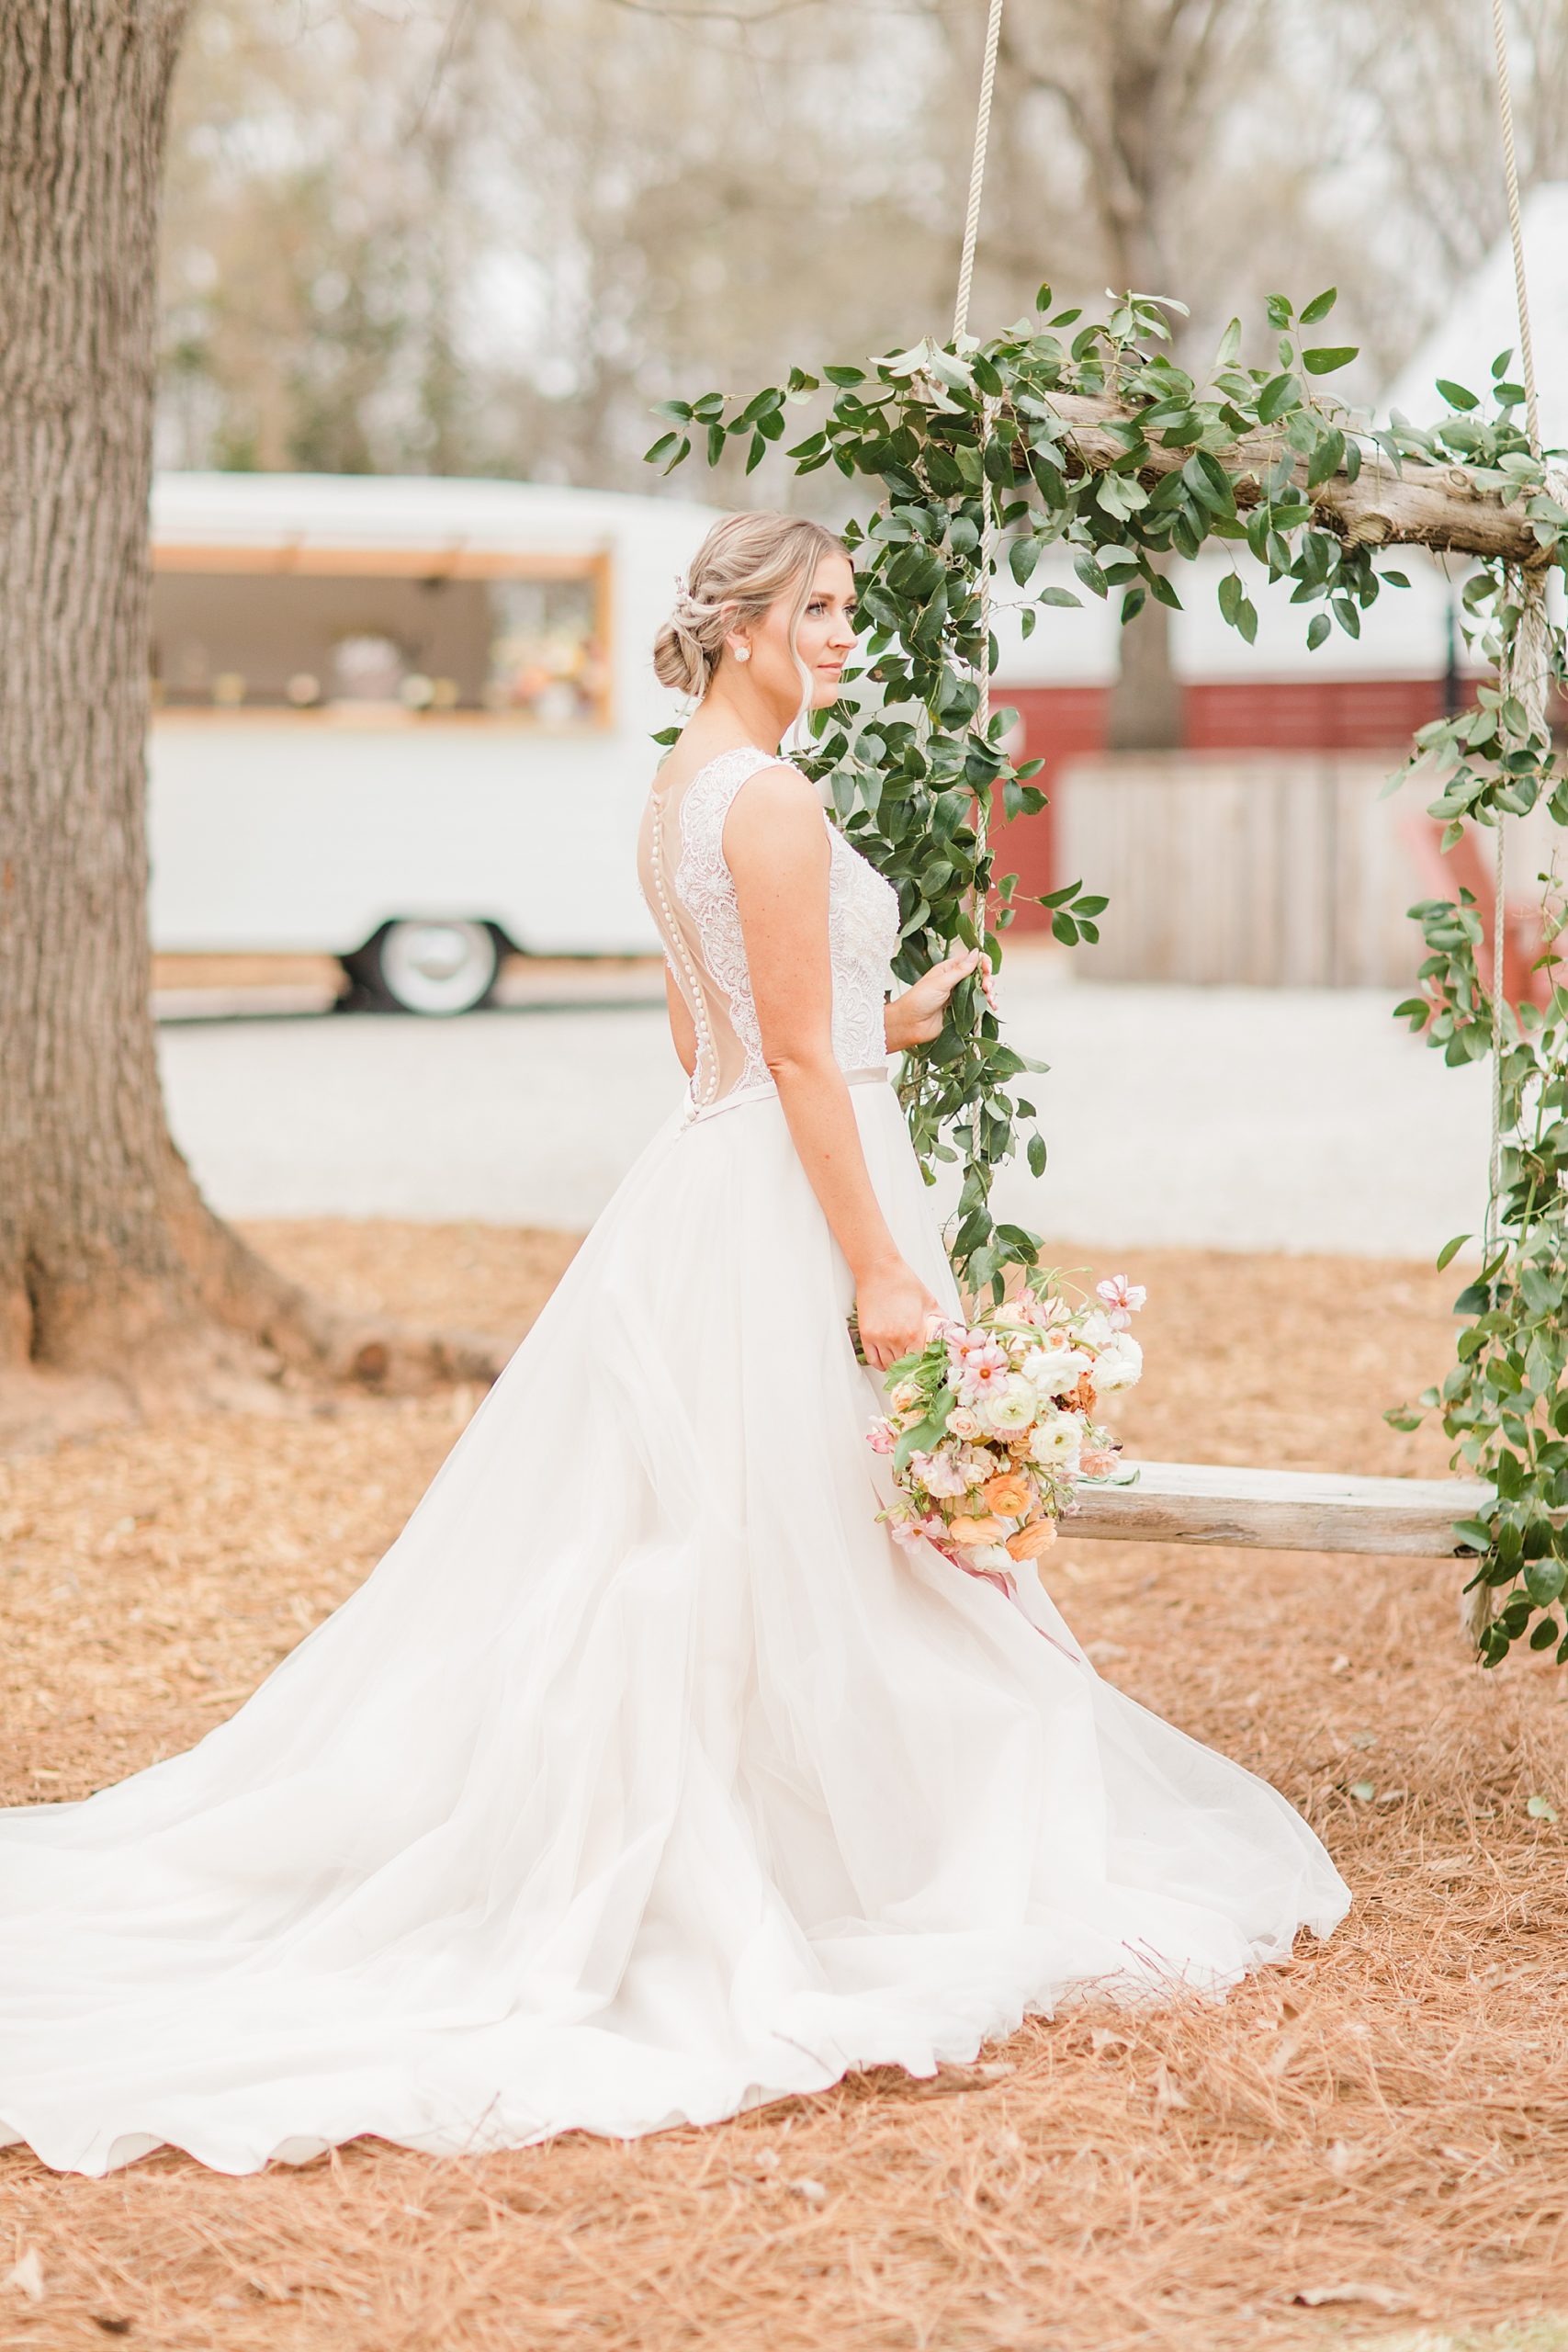 bride poses in wedding gown by floral arbor with ivy